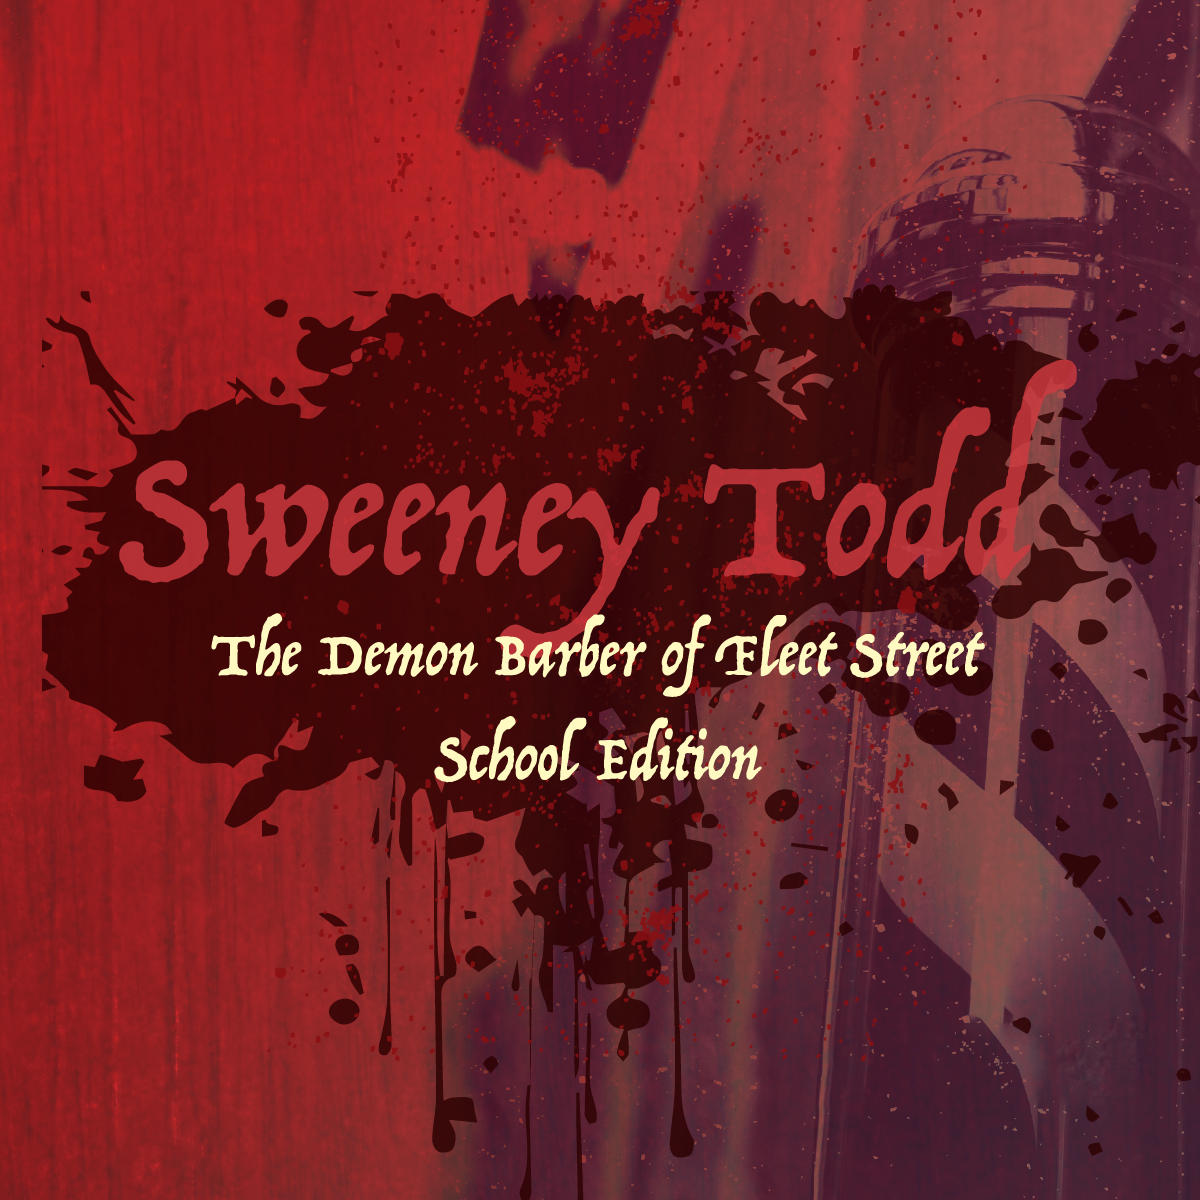 Text logo of Sweeney Todd set over a blood splattered image of a red tinted photograph of a barber pole